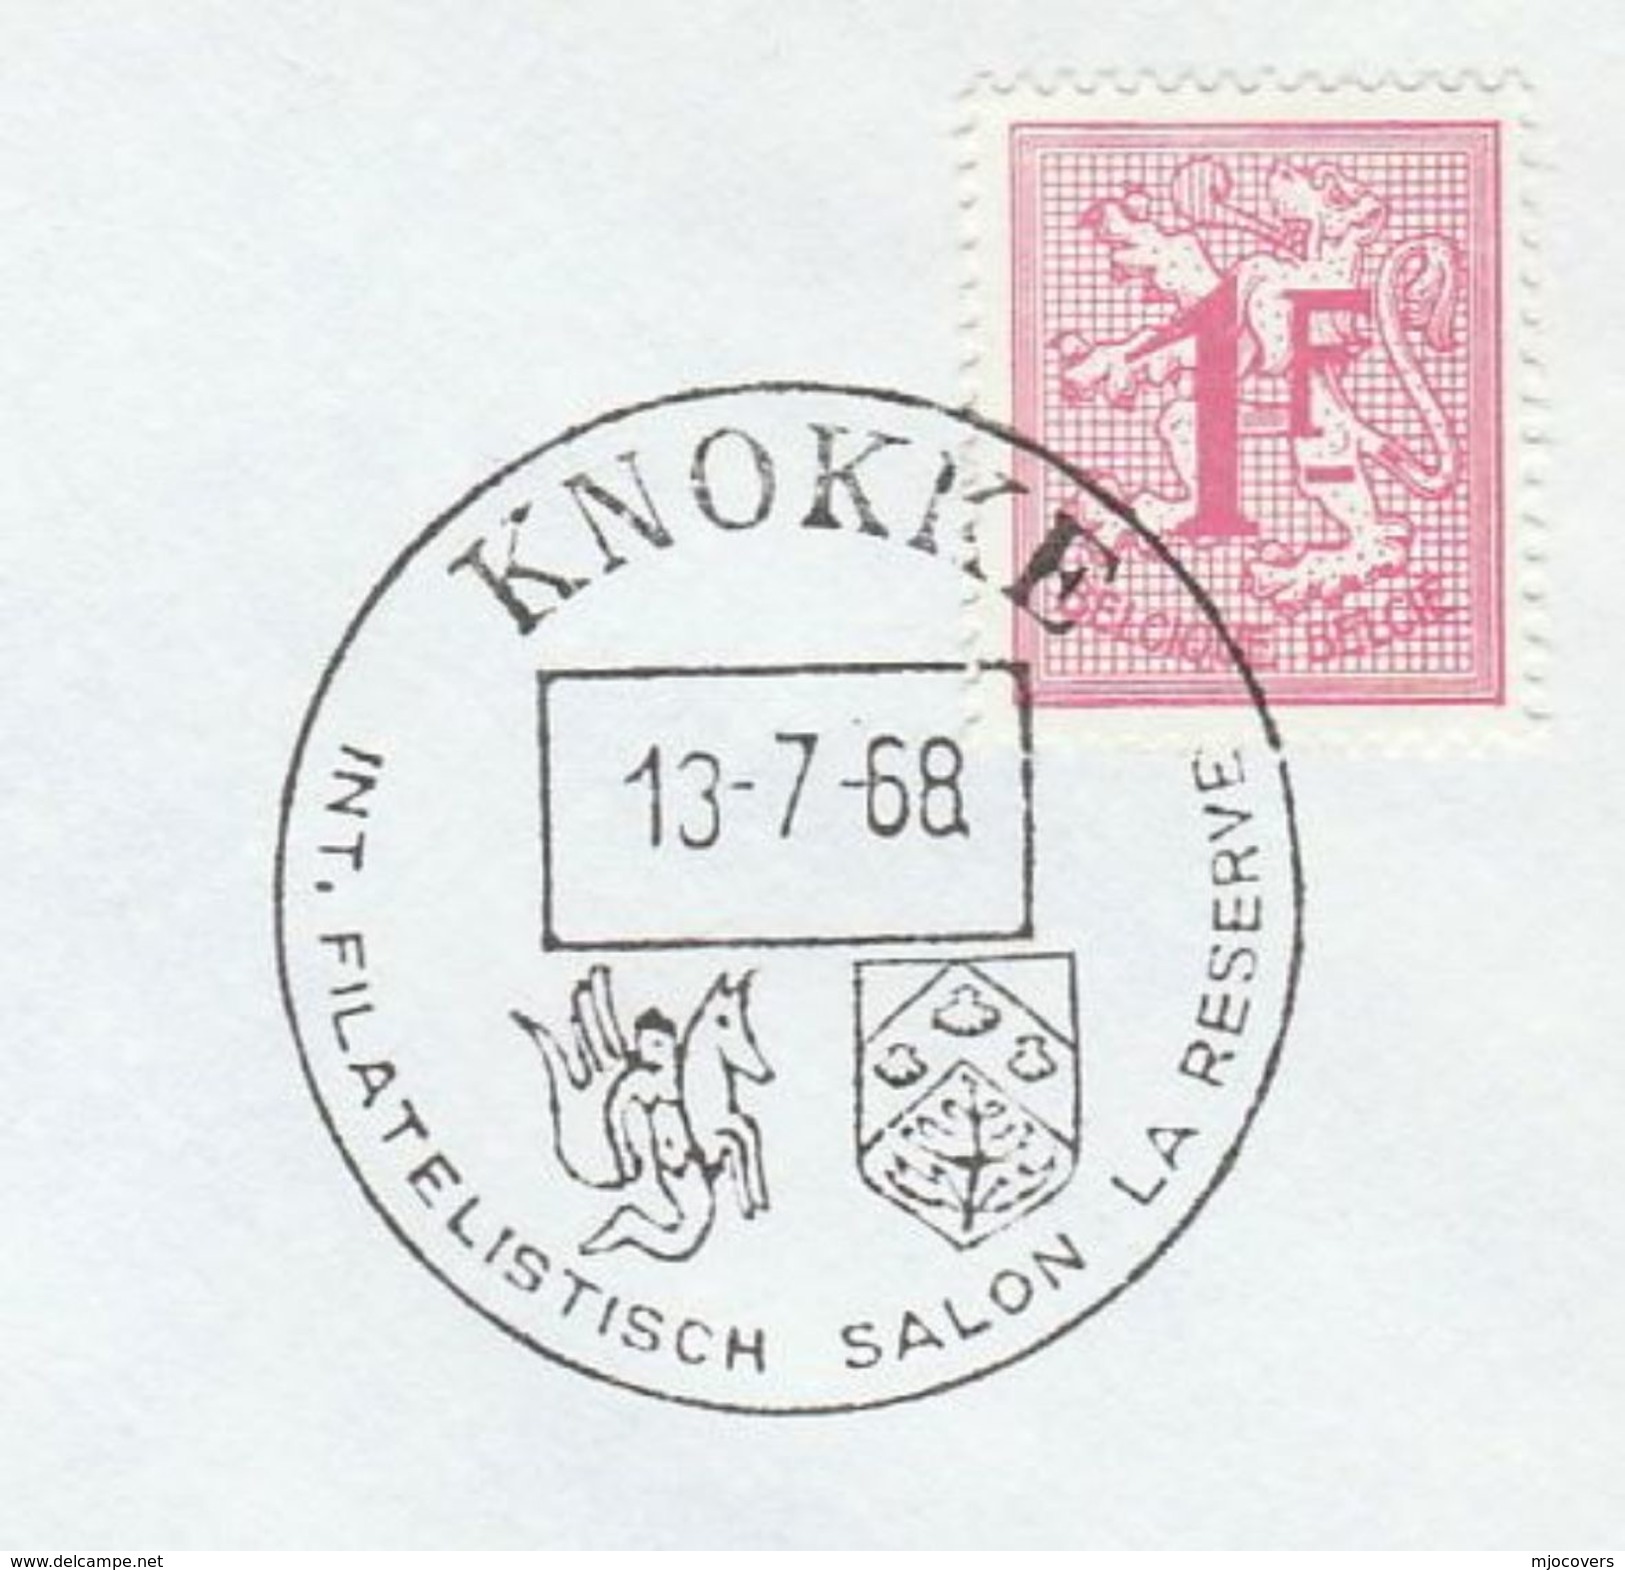 1968 Knokke MERMAID ?  EVENT COVER Coat Of Arms Philatelic Exhibition, Stamps - Mitologia